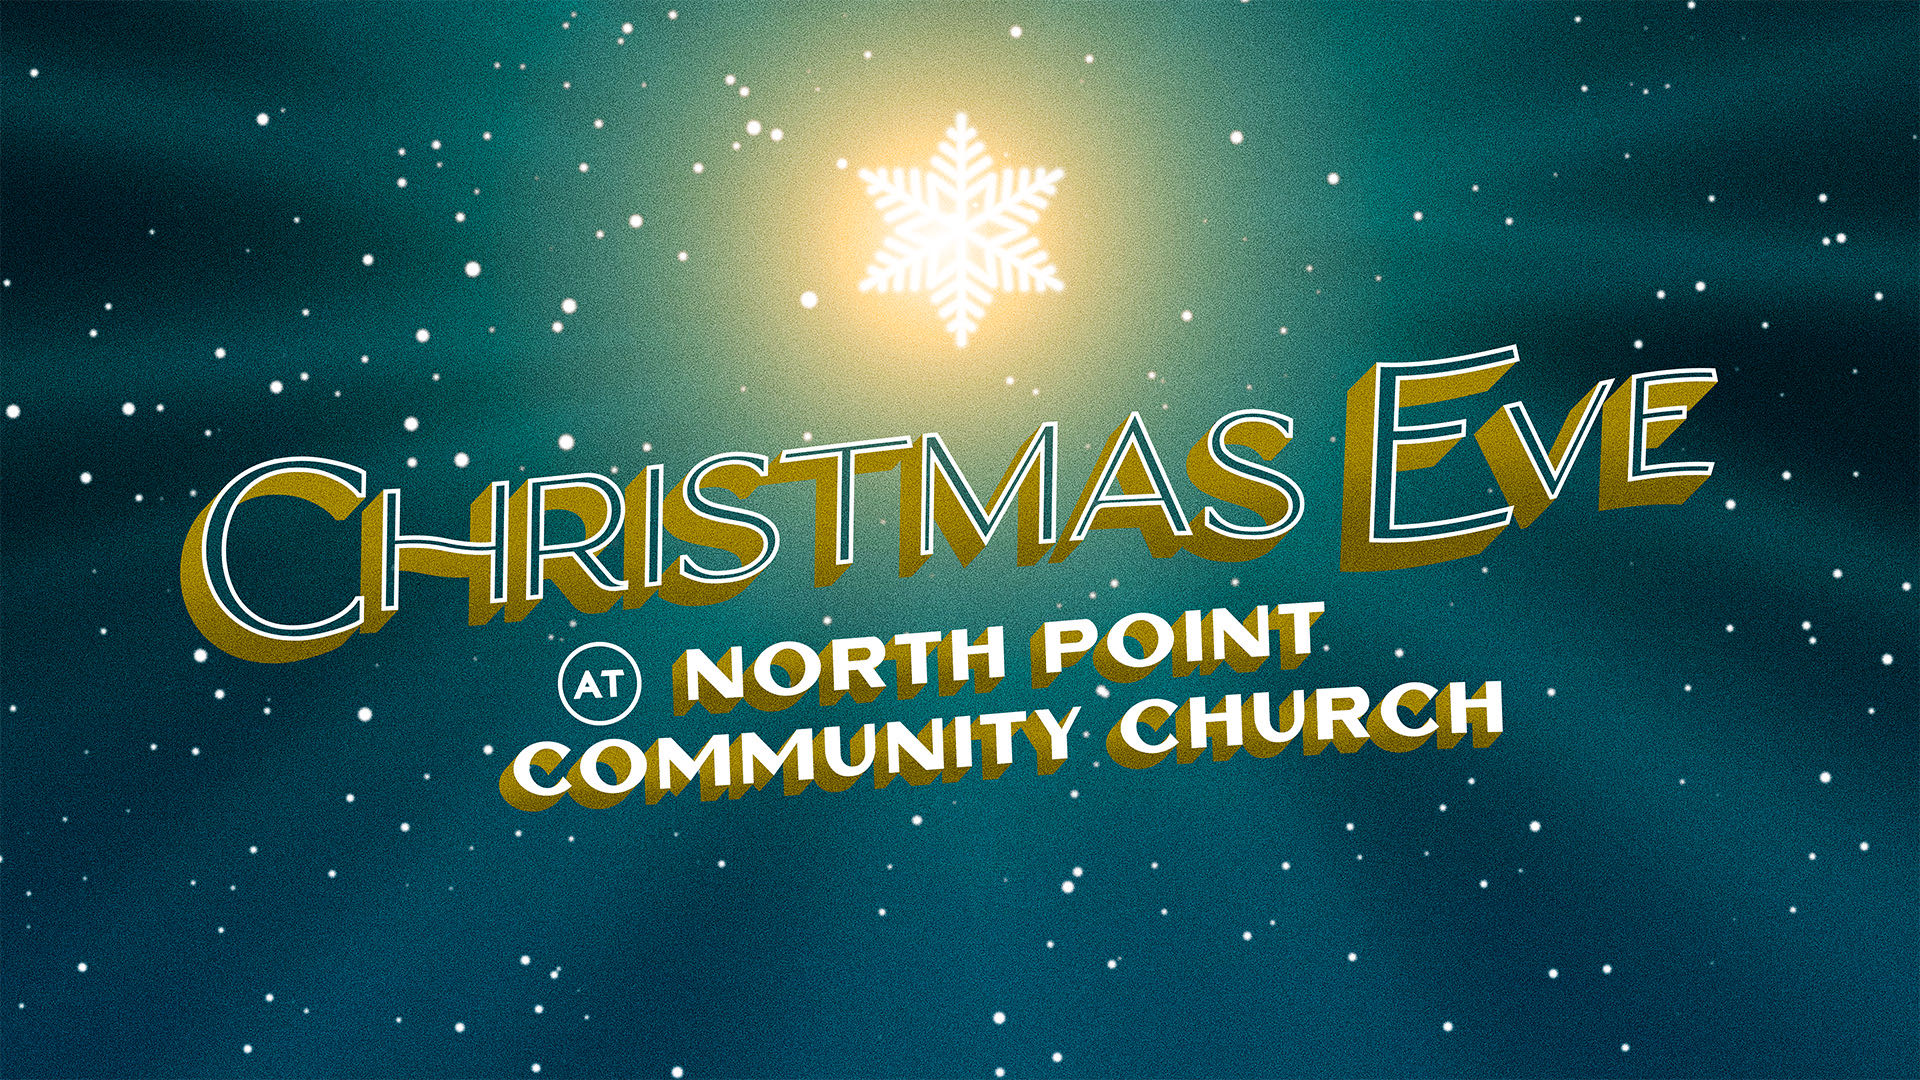 Christmas Eve at North Point Community Church